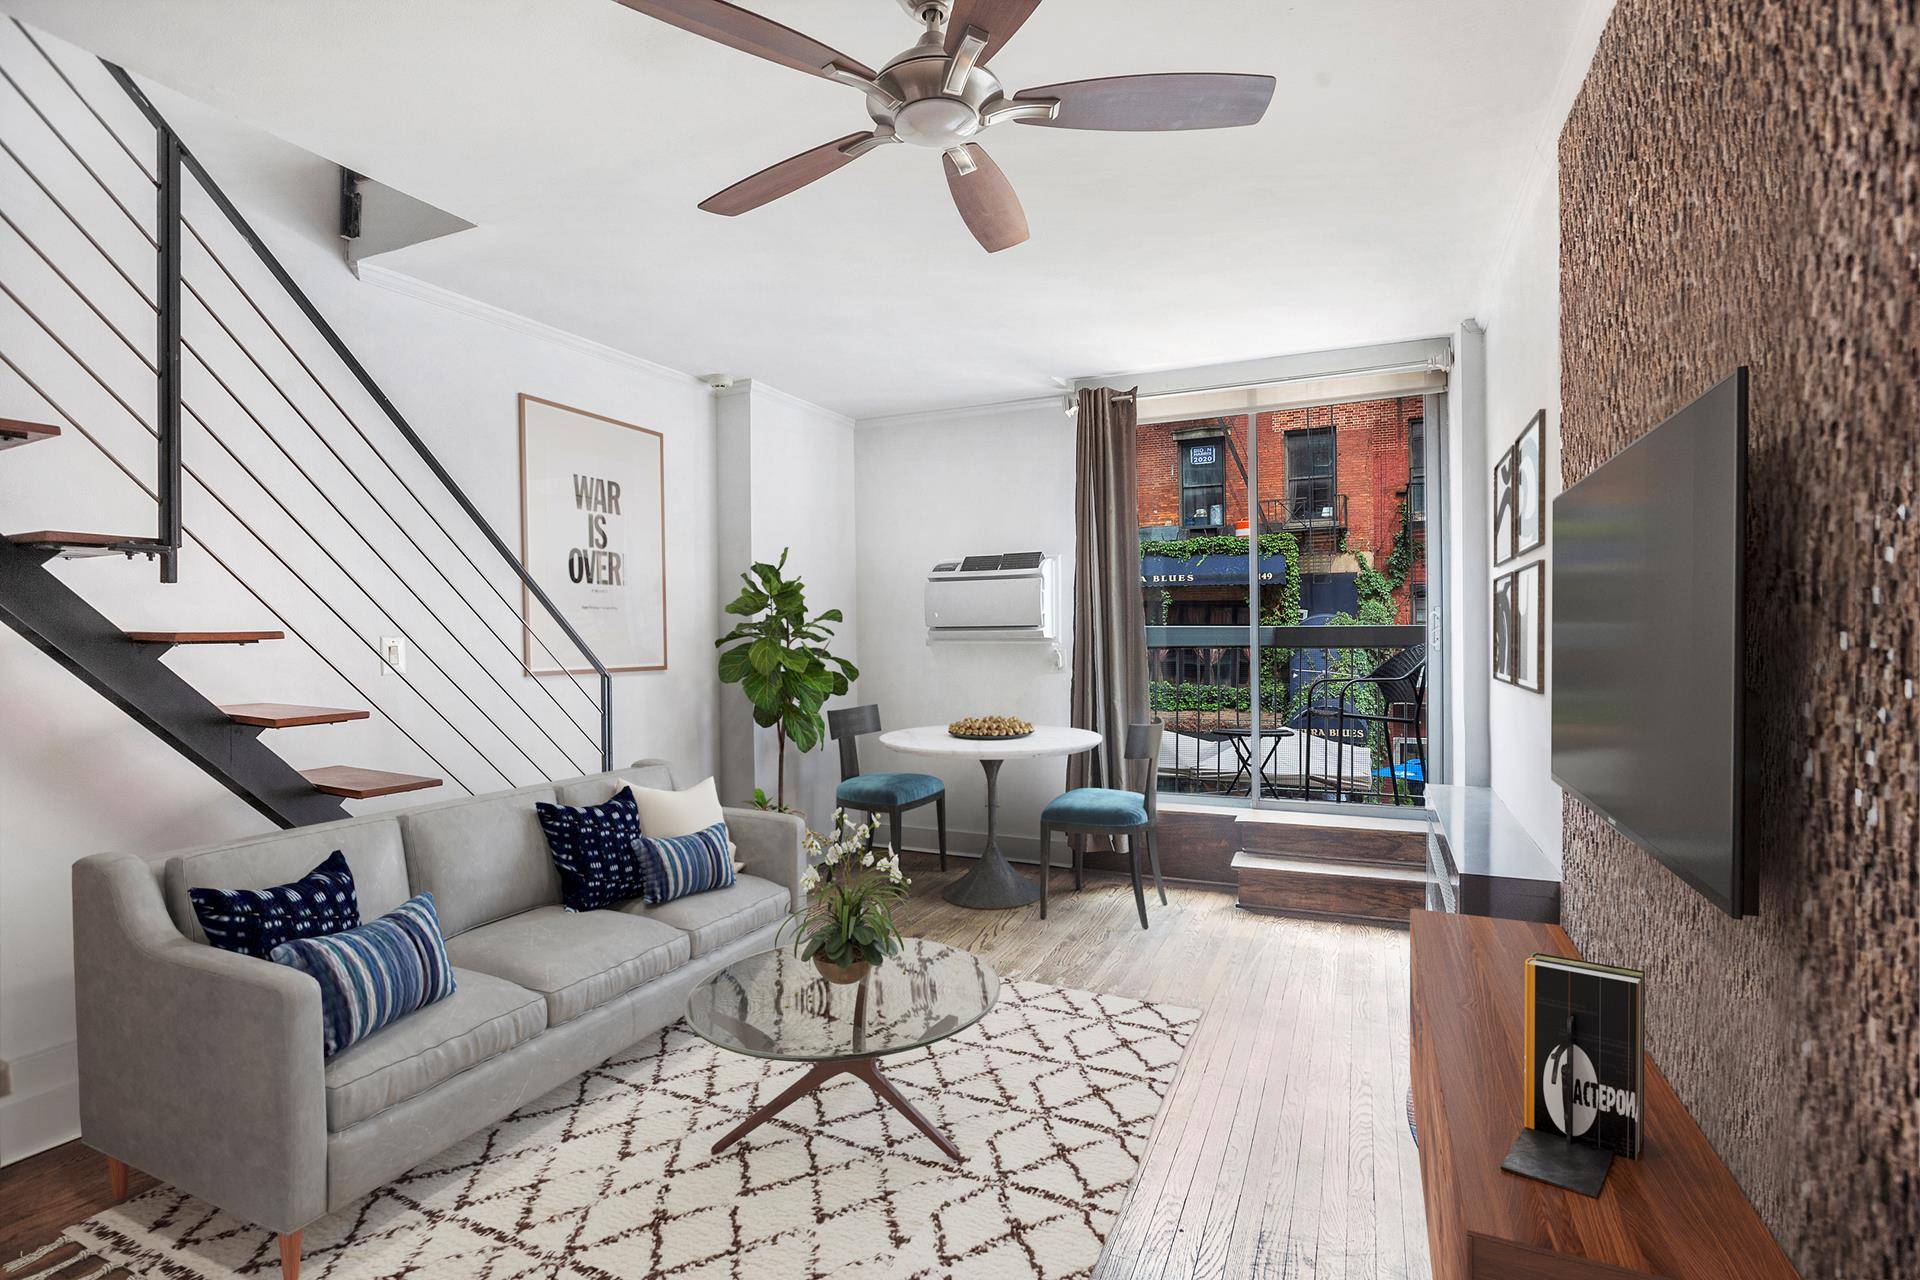 LOCATION LOCATION Rare duplex Condo Turn Key Modern one bedroom that can convert to 2 br In the heart of Greenwich Village.